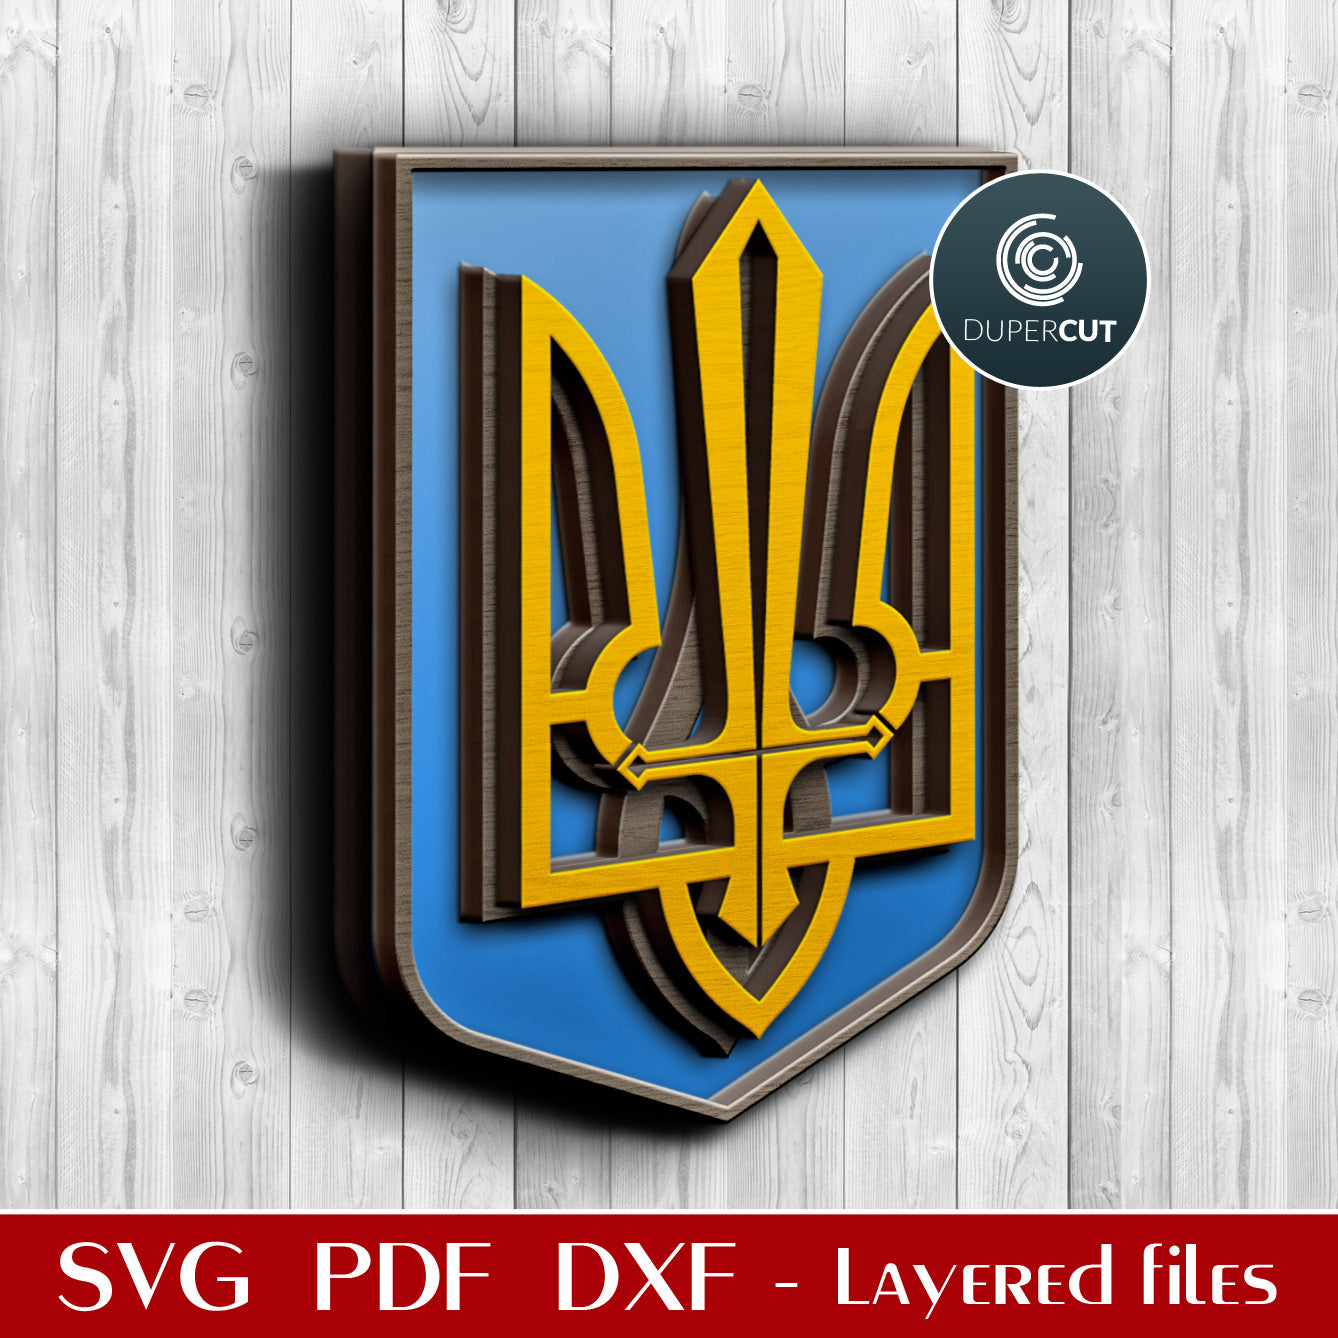 Coat of Arms of Ukraine - blue shield with gold trident - SVG PDF DXF layered laser cutting files for Glowforge, Cricut, Silhouette, CNC plasma laser cutting machines by DuperCut